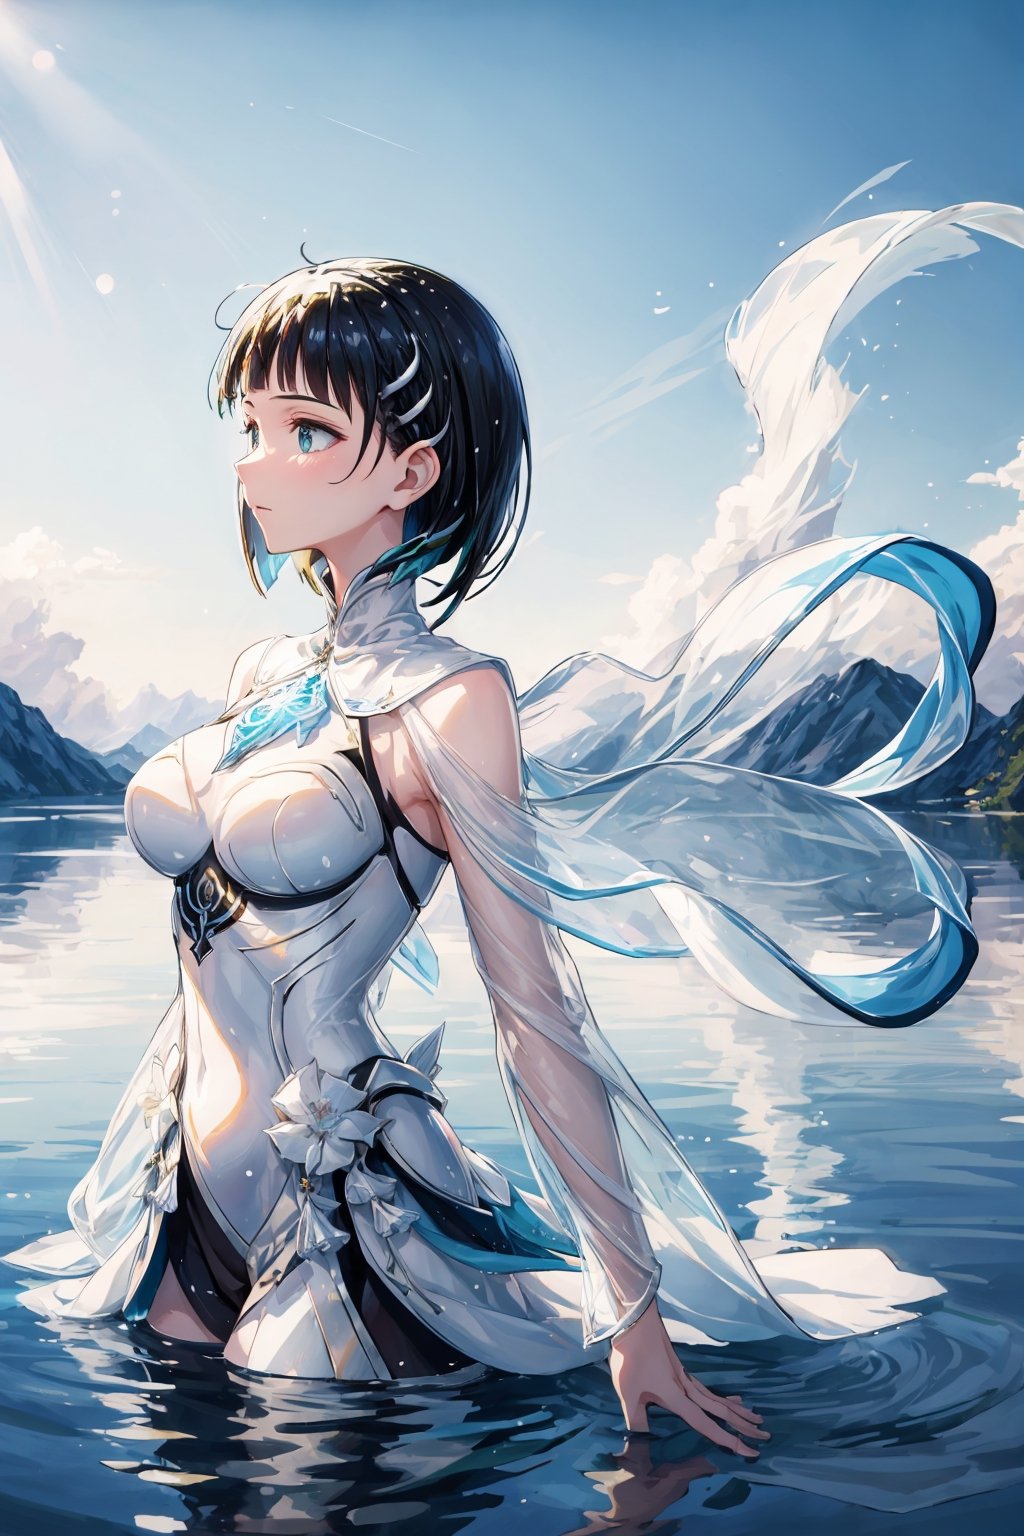 tall and slender, with a graceful bearing, upper_body,  frozen background, light,  sunlight,  magic,  lake,   clothes,  floating_hair,  floating water, water magic,  white armor ornaments,  flowers,  sunshine,  light reflections  ,(suguha:1.4),masterpiece,Colorful